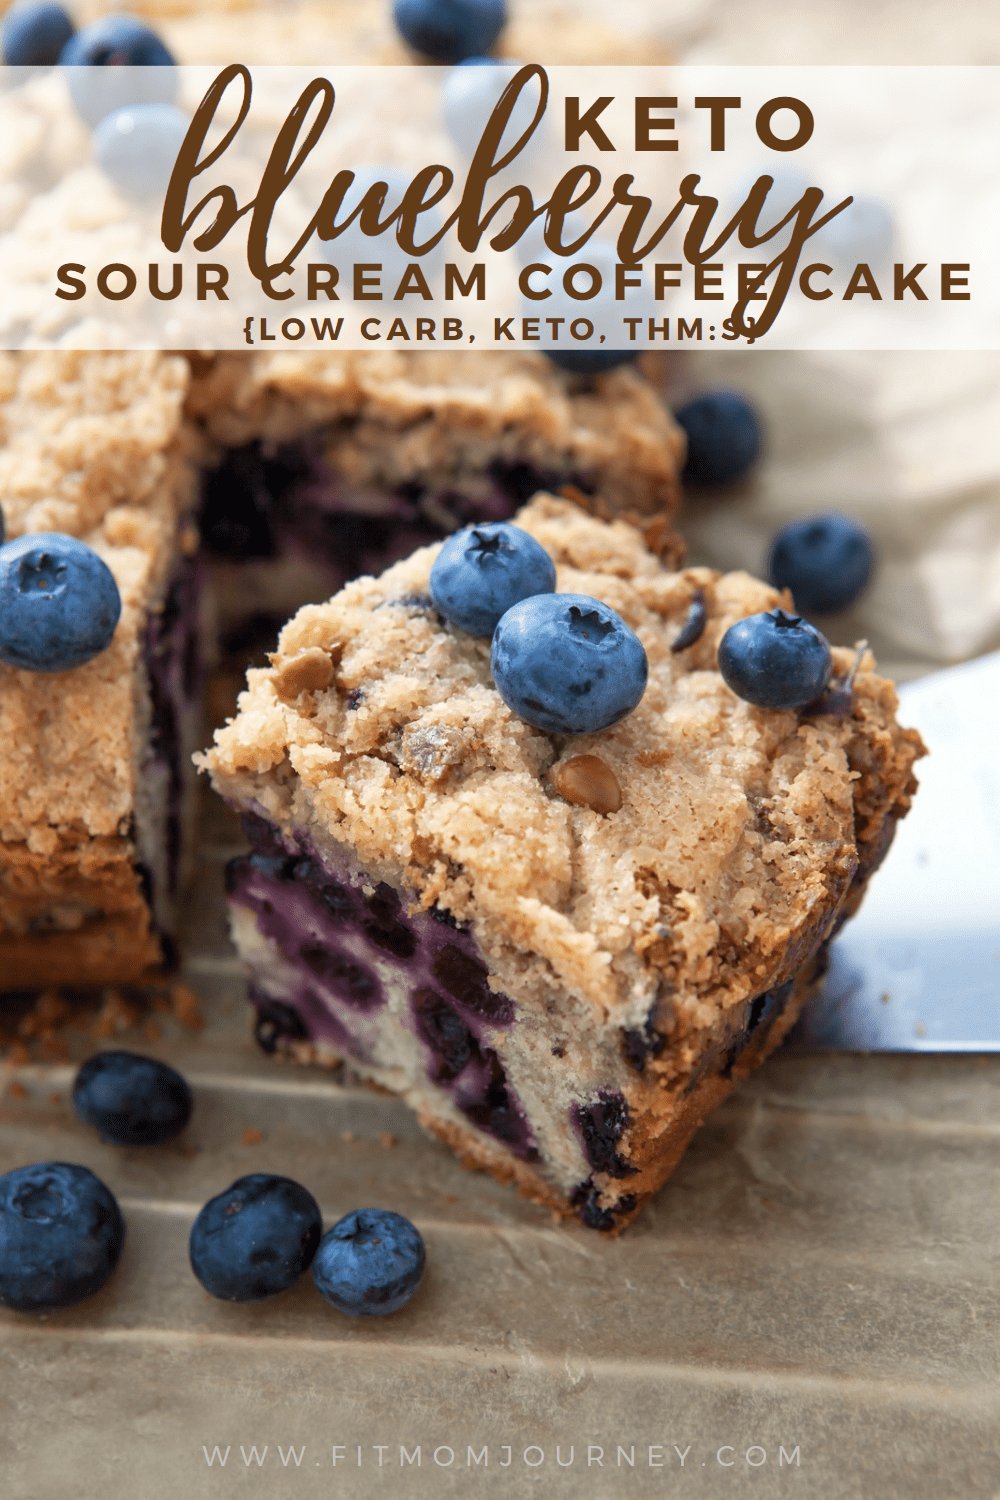 Nothing says weekend brunch like coffee cake!  Keto Blueberry Sour Cream Coffee Cake is incredibly easy to make, and absolutely delicious.  You won't want to stop at just one piece!